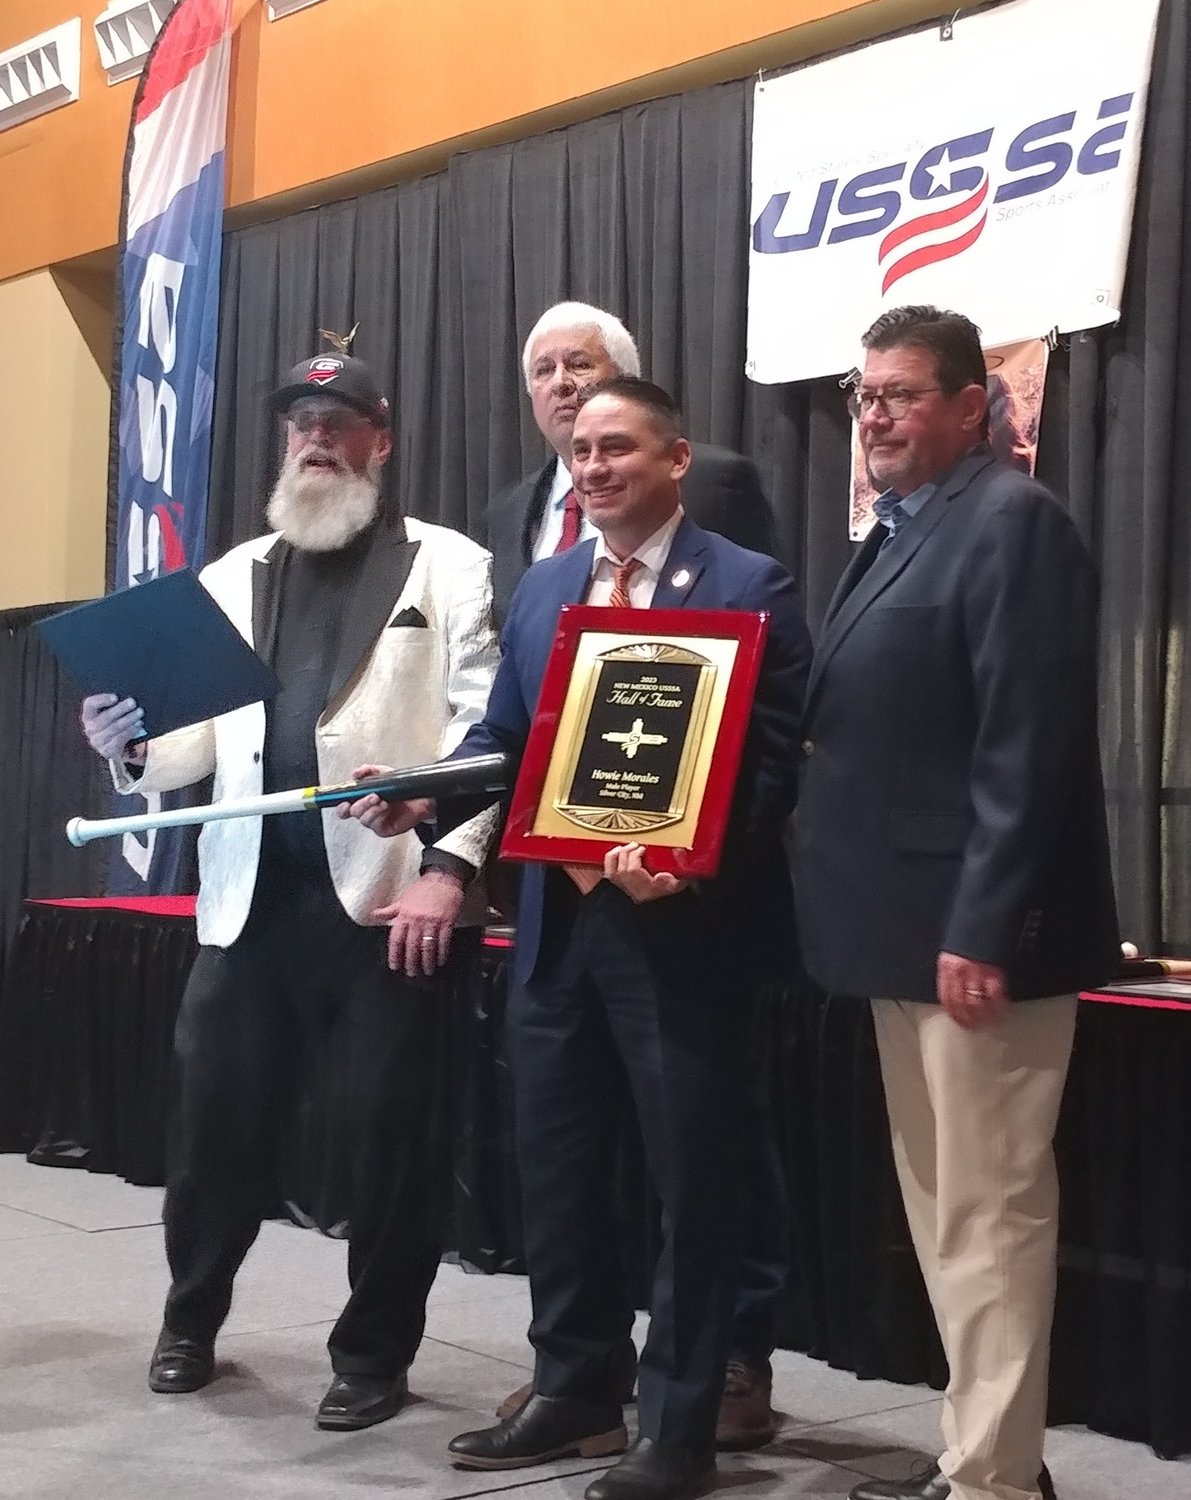 Lt Gov. Howie Morales was inducted into the New Mexico U.S. Specialty Sports Association Hall of Fame Feb. 25 in Las Cruces. Behind him are, left to right, Bert Frederick of Las Cruces, Ron Parra of Silver City and Kevin Naegele of Hobbs.